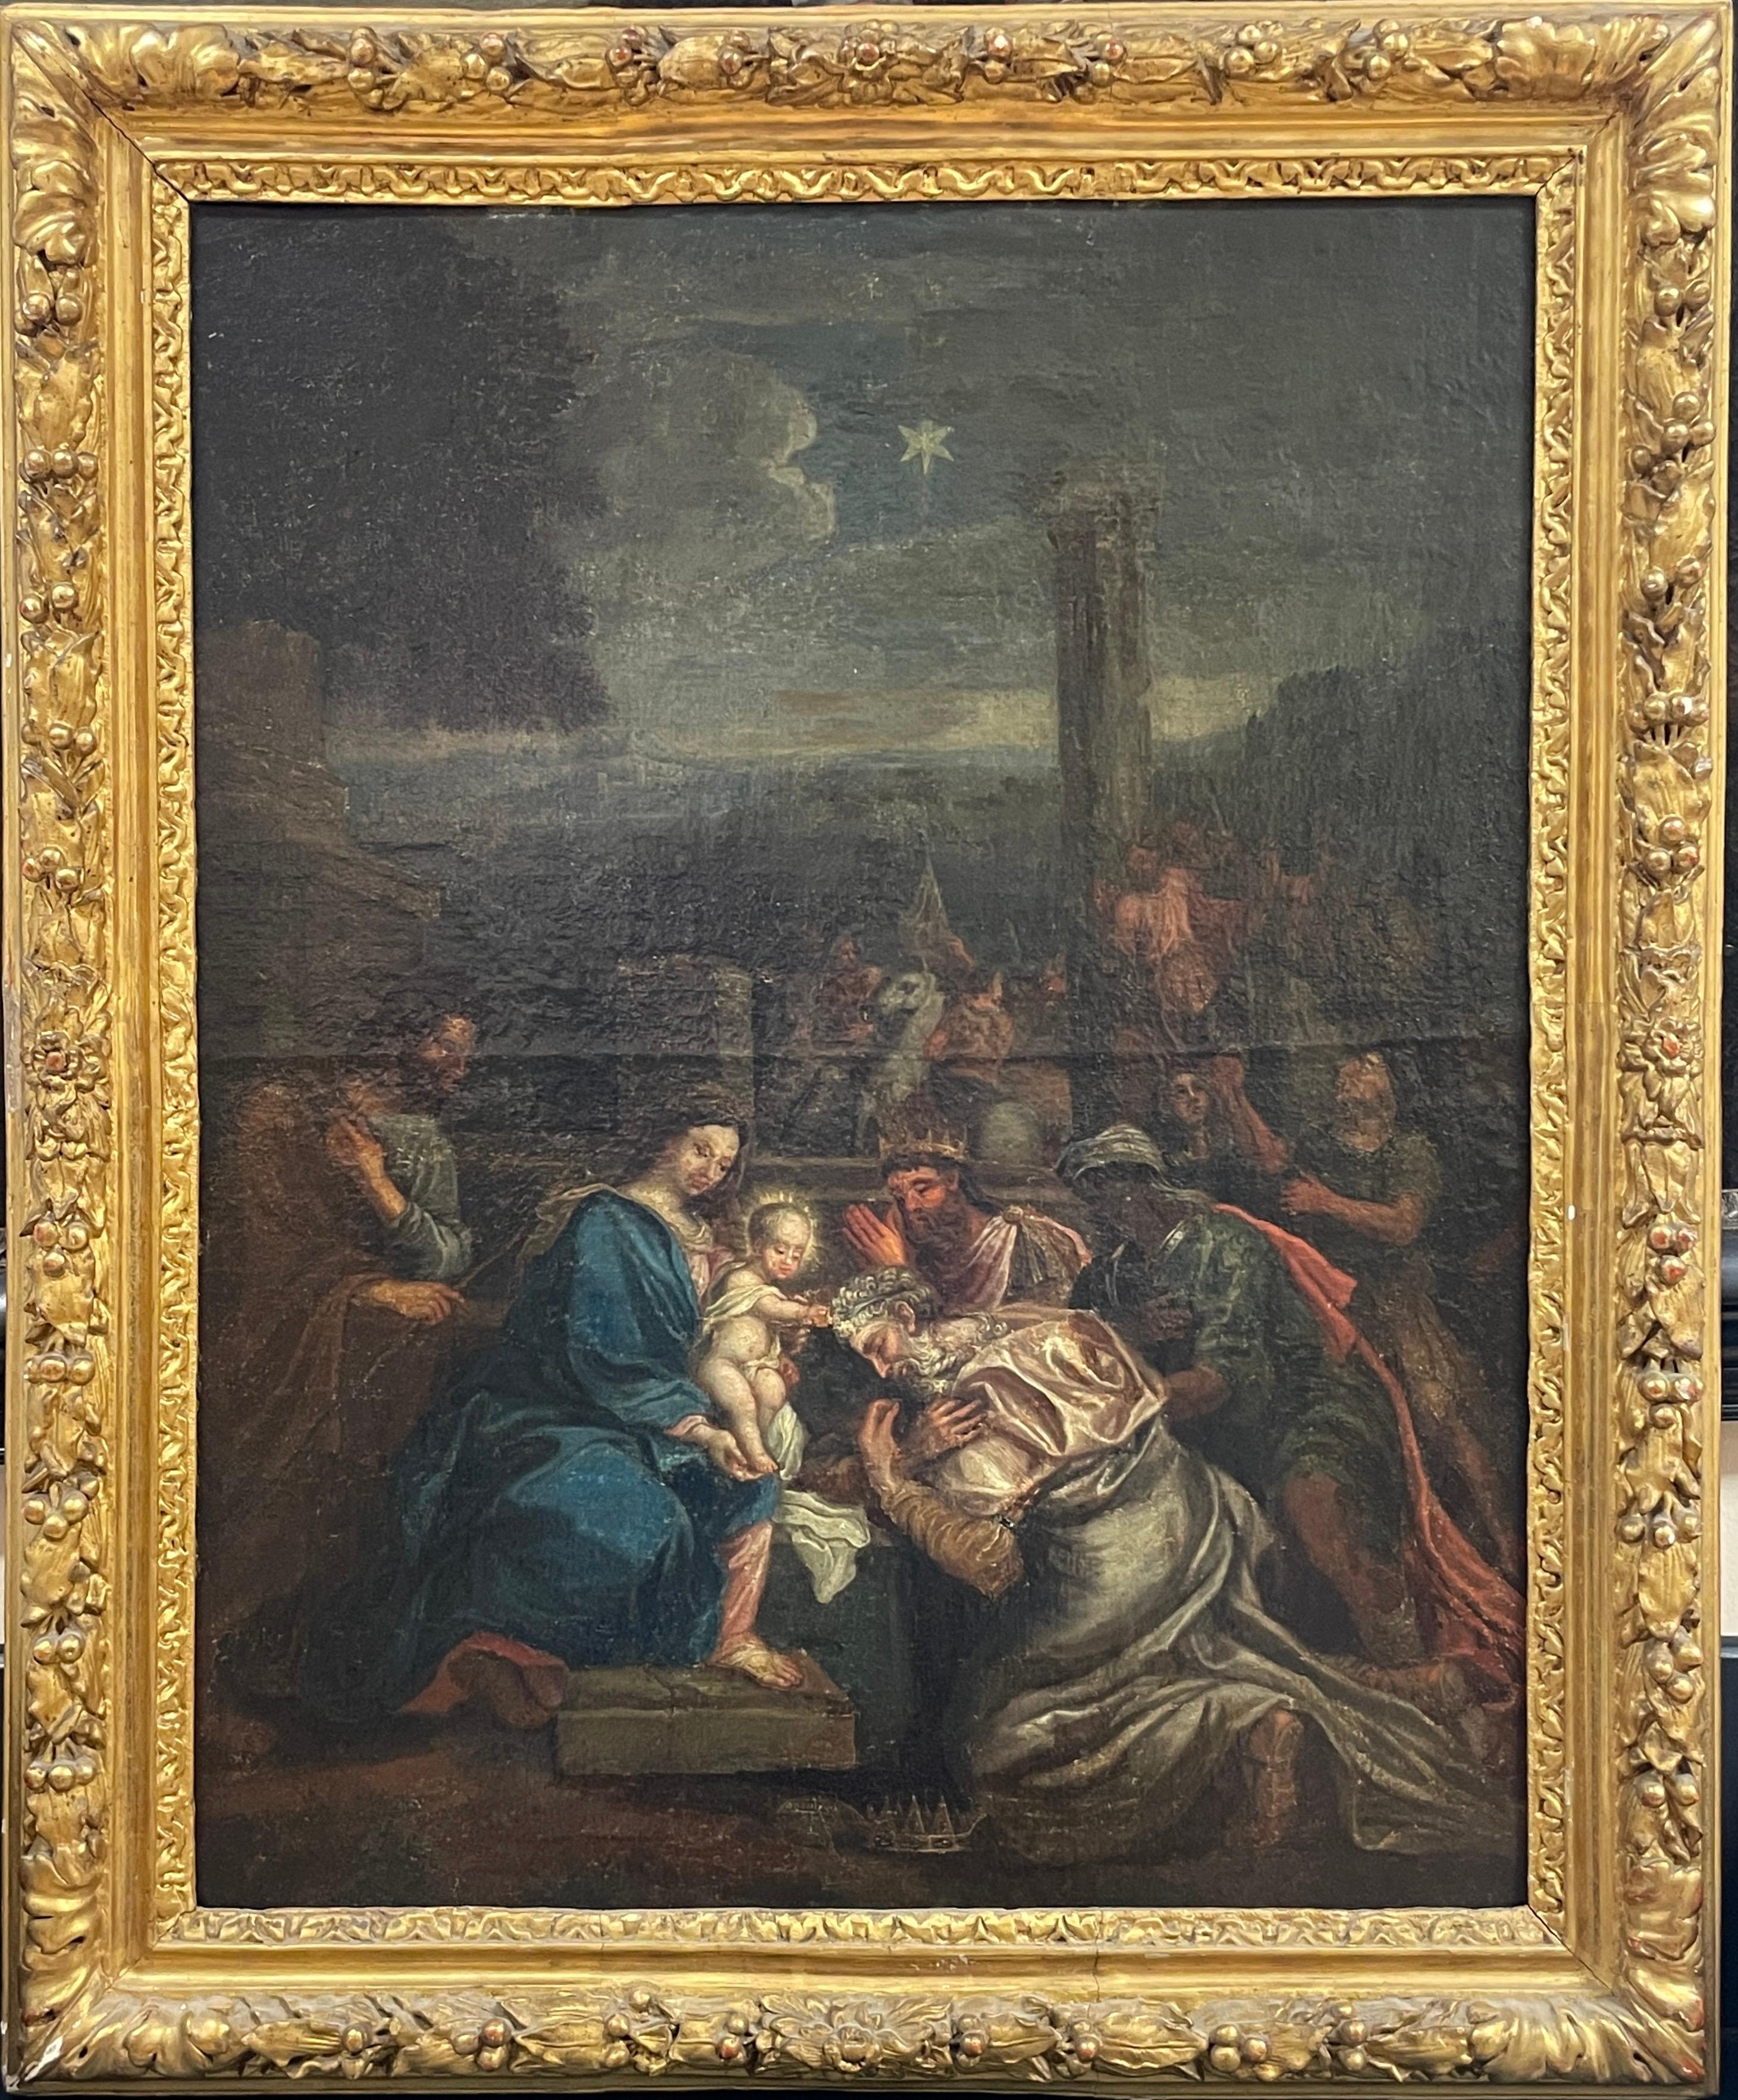 The Nativity
Flemish School, early 17th century
oil painting on canvas, framed
18th century gilt frame. 
canvas: 25.5 x 20.25 inches
framed: 30 x 25 inches
condition: very presentable and in stable, sound condition; ready to be enjoyed. As with any